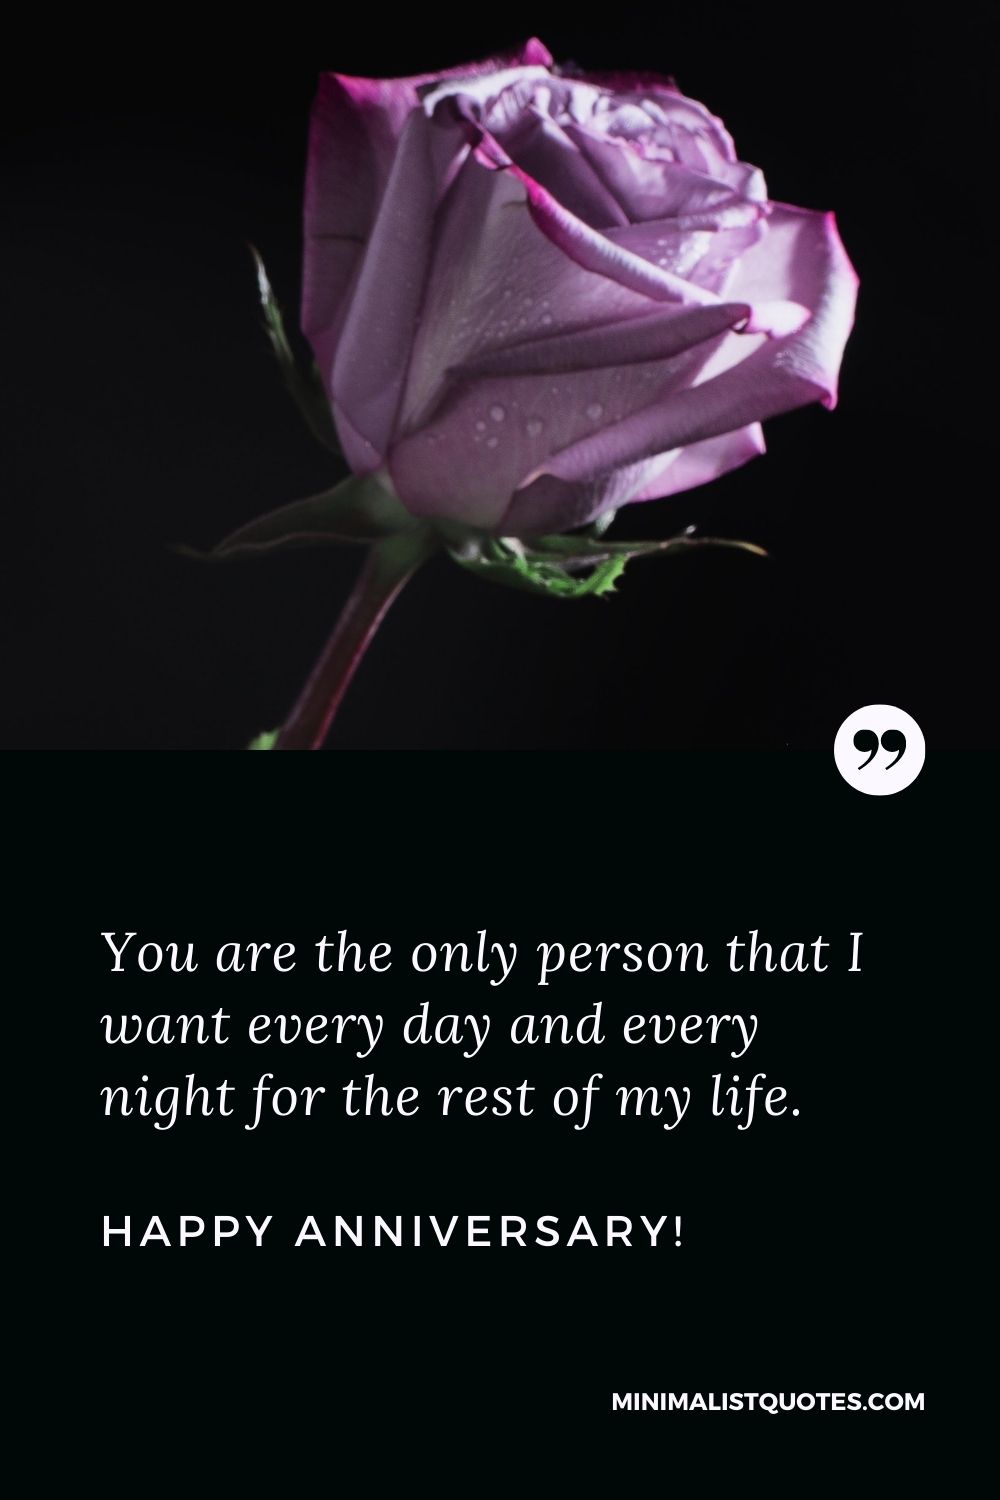 Happy anniversary wishes for husband: You are the only person that I want every day and every night for the rest of my life. Happy Anniversary!